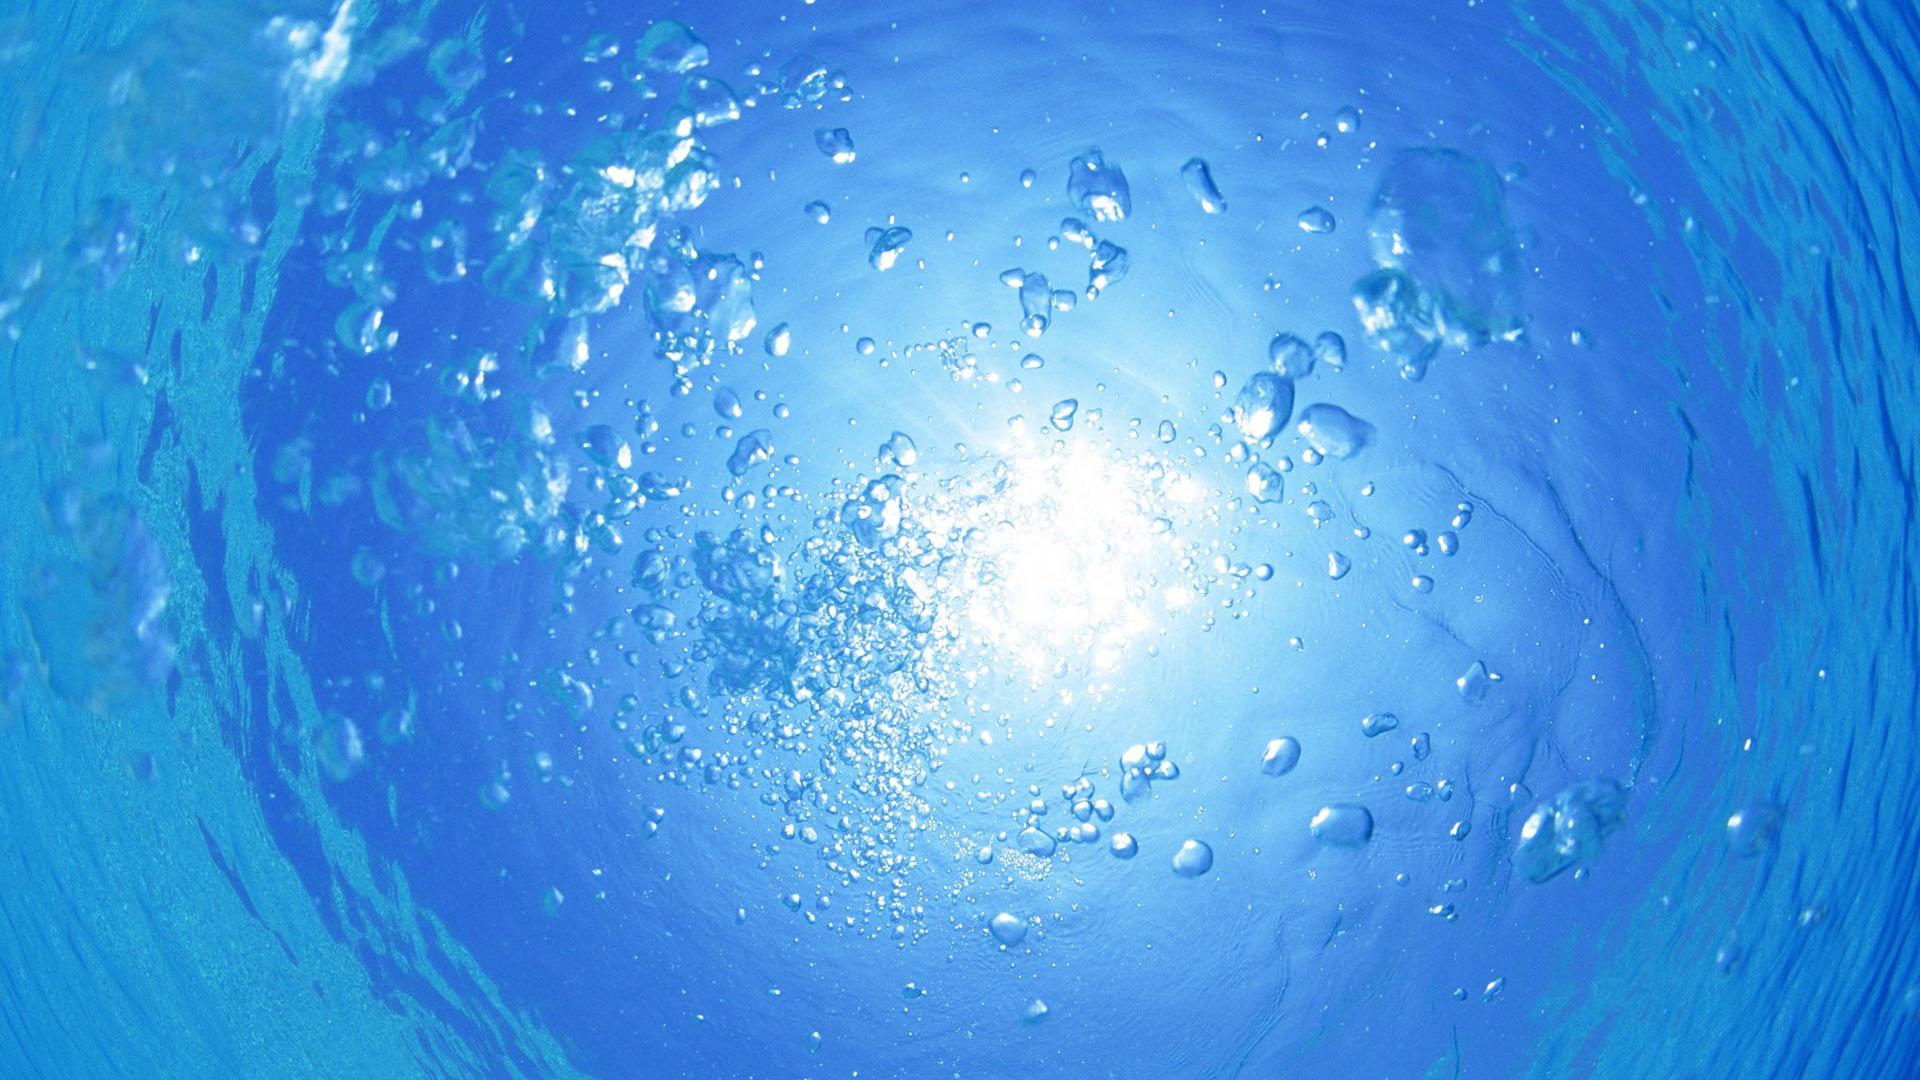 Under Water With Bubbles - HD Wallpaper 